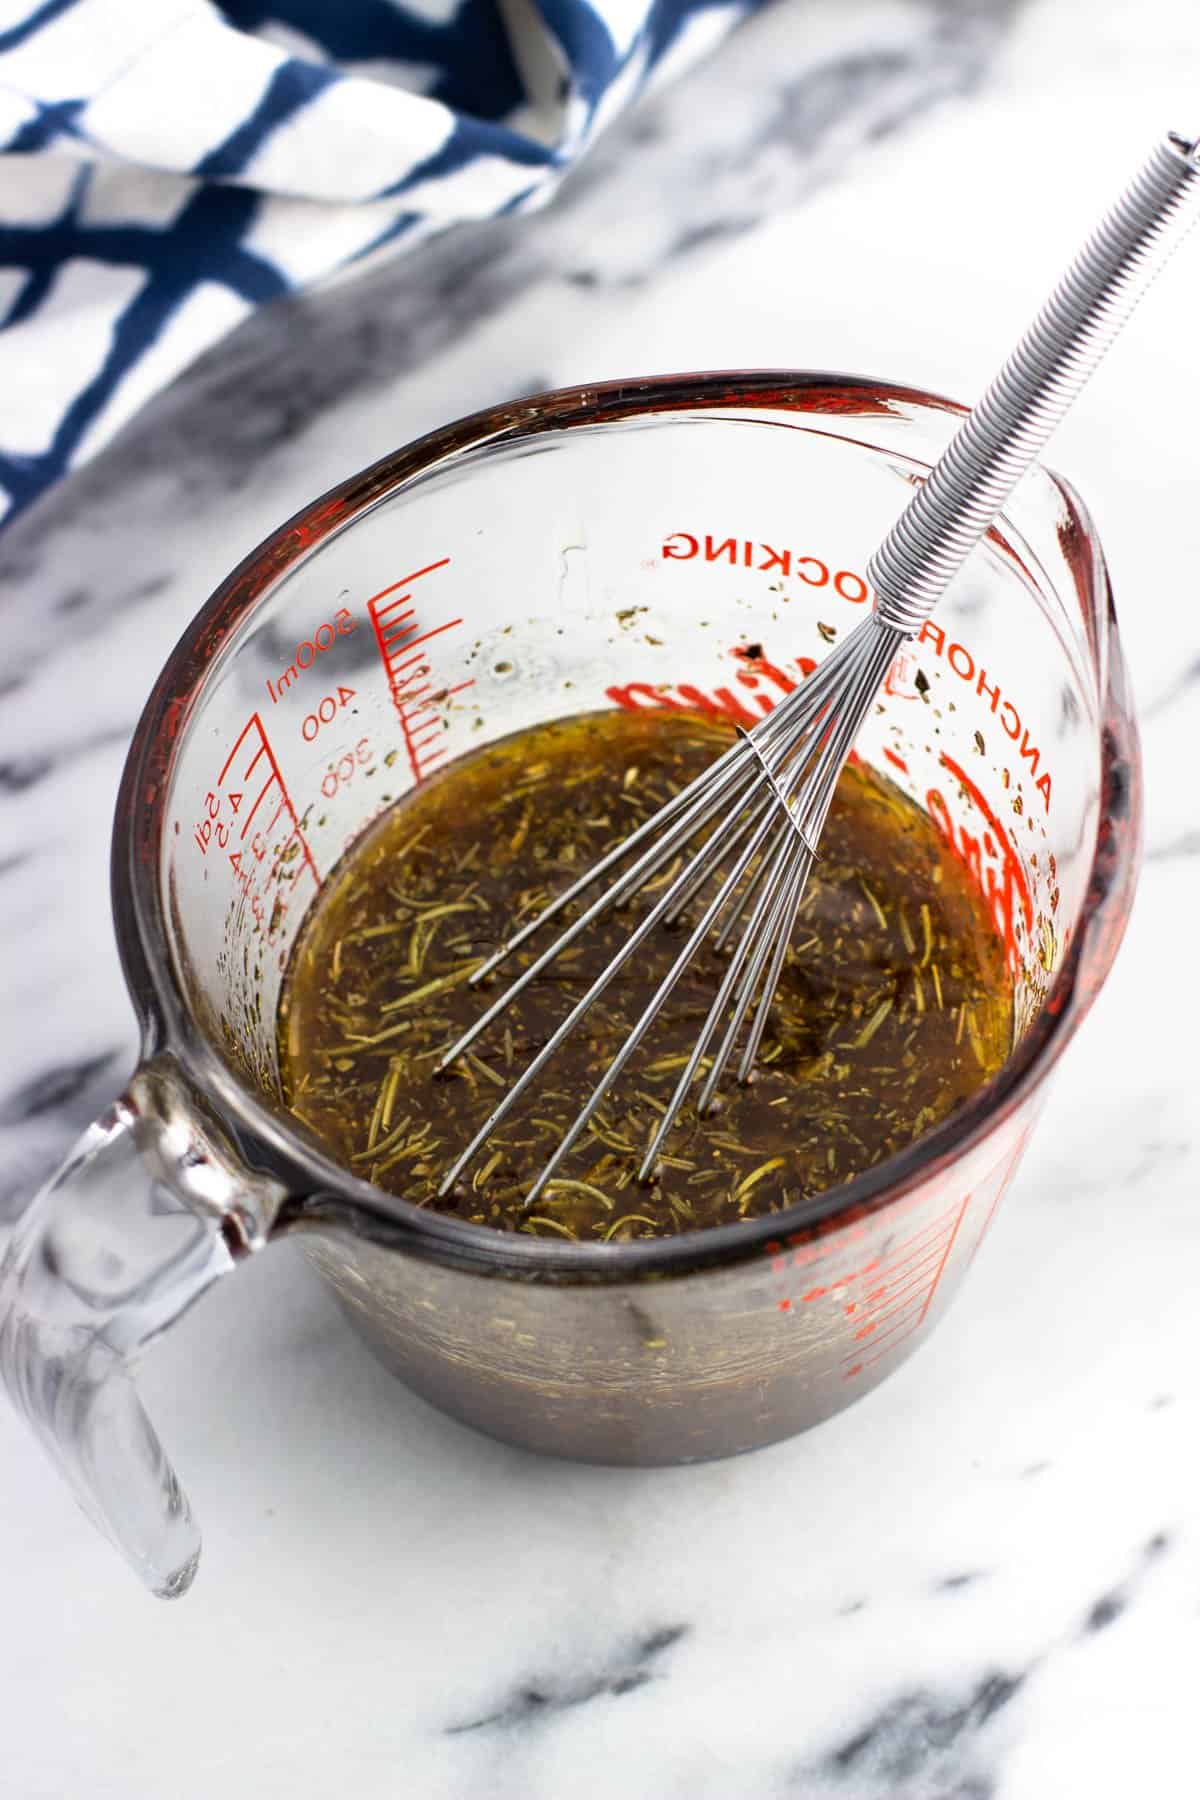 Chicken thigh marinade ingredients whisked together in a glass measuring cup.